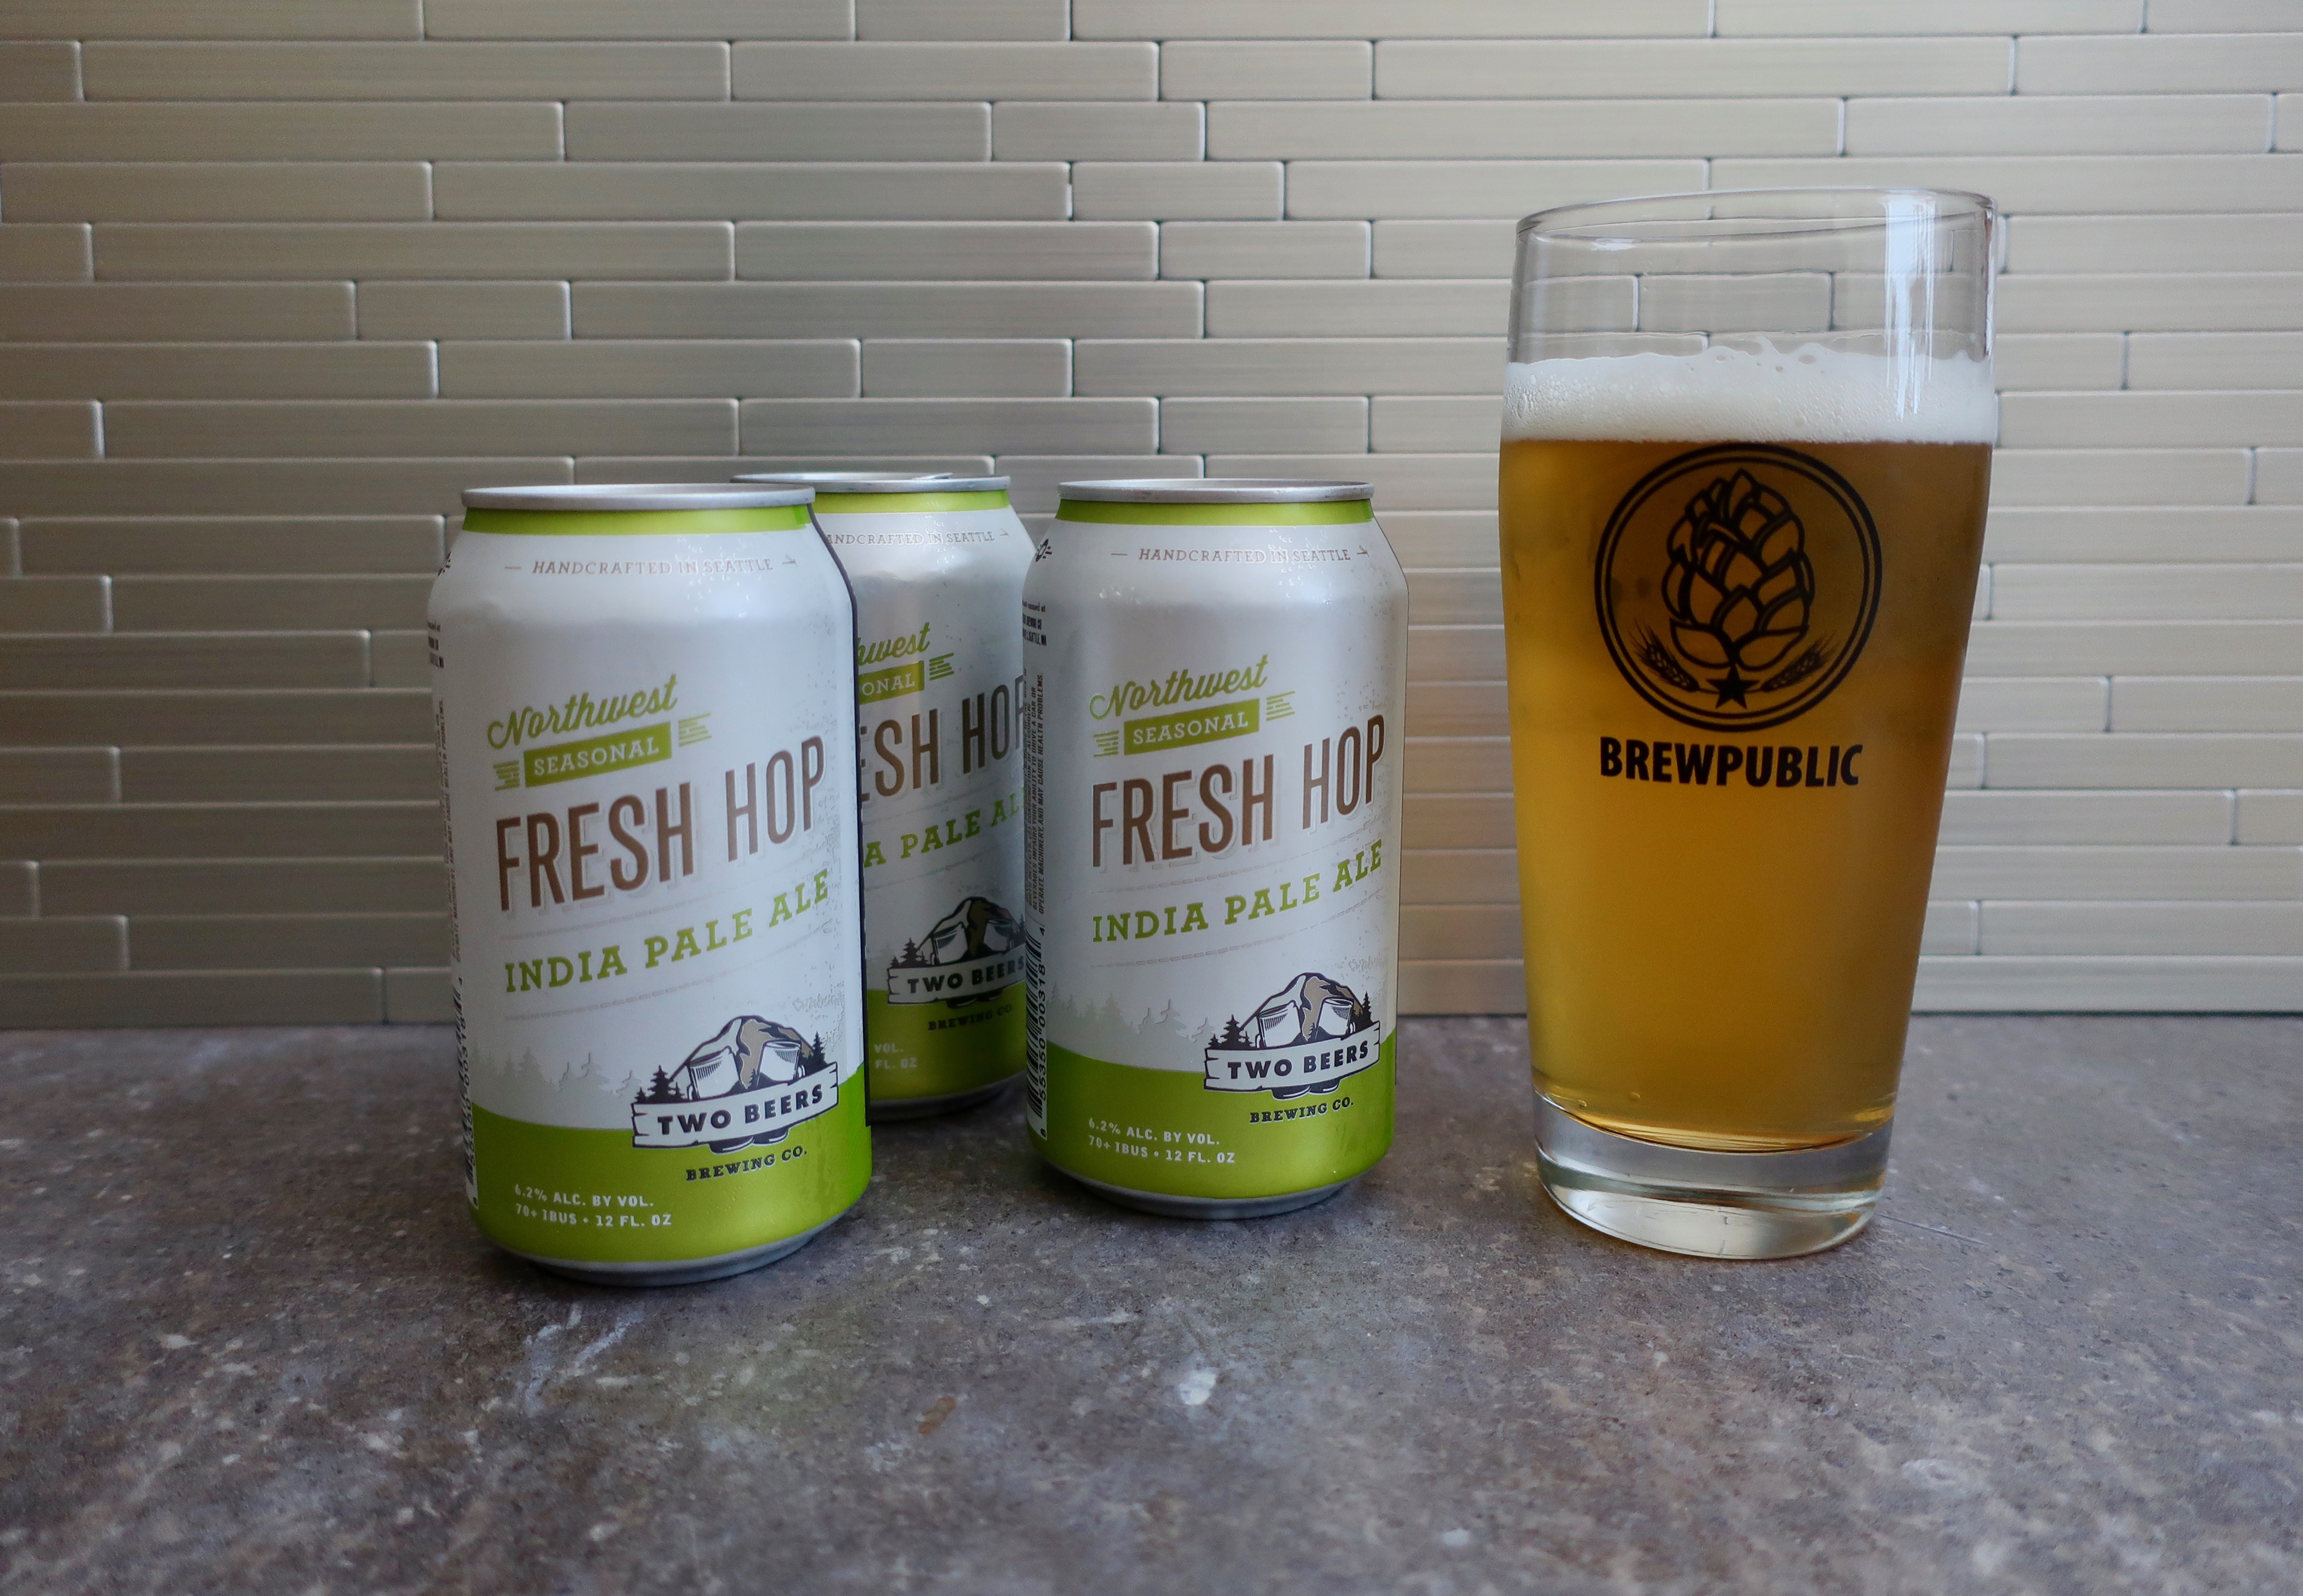 The 2018 Fresh Hop season has begun. Two Beers Brewing has released its Fresh Hop IPA in 12 ounce cans.